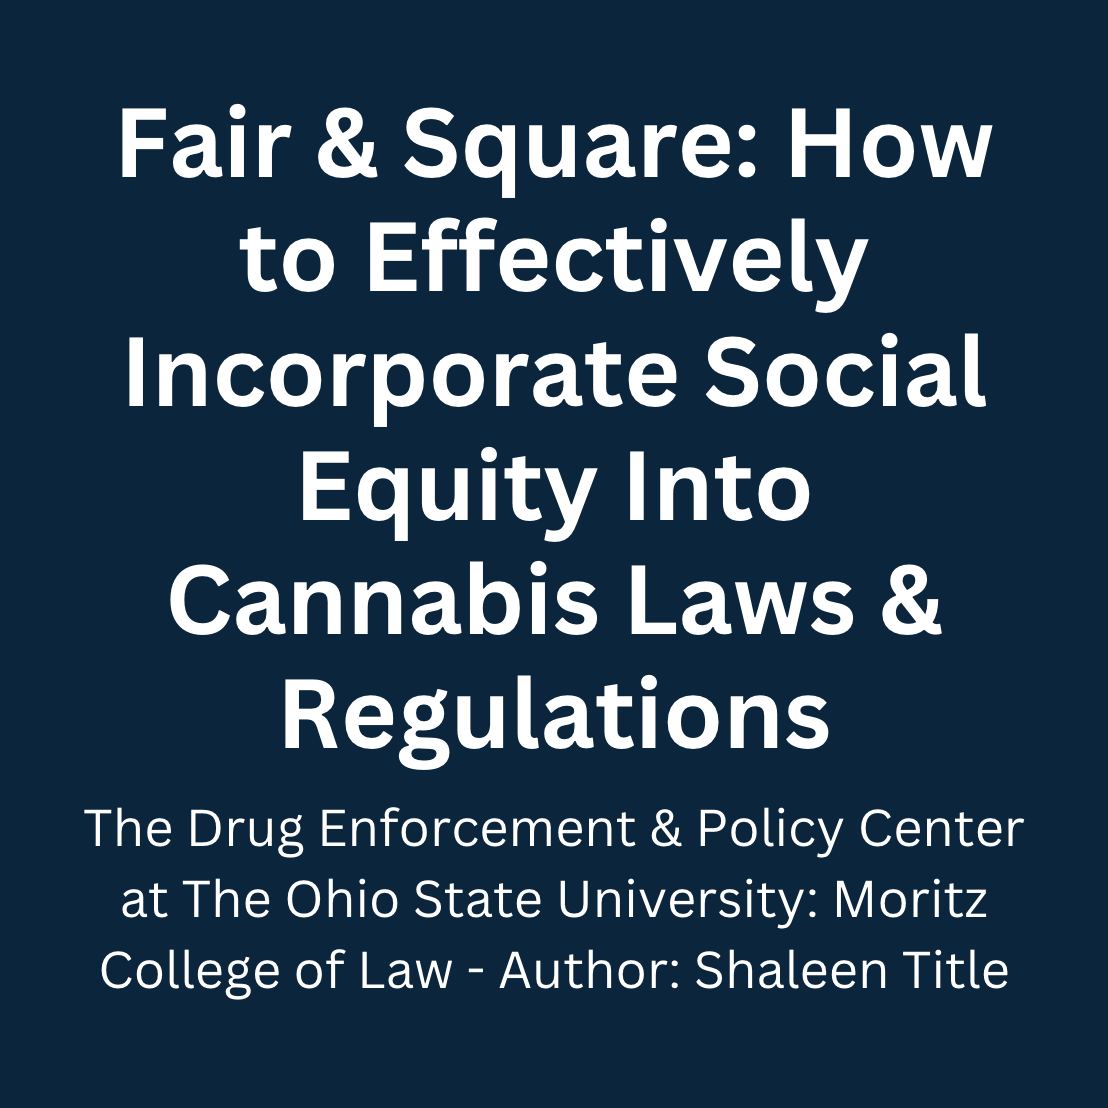 Fair & Square: How to Effectively Incorporate Social Equity into Cannabis Laws & Regulations